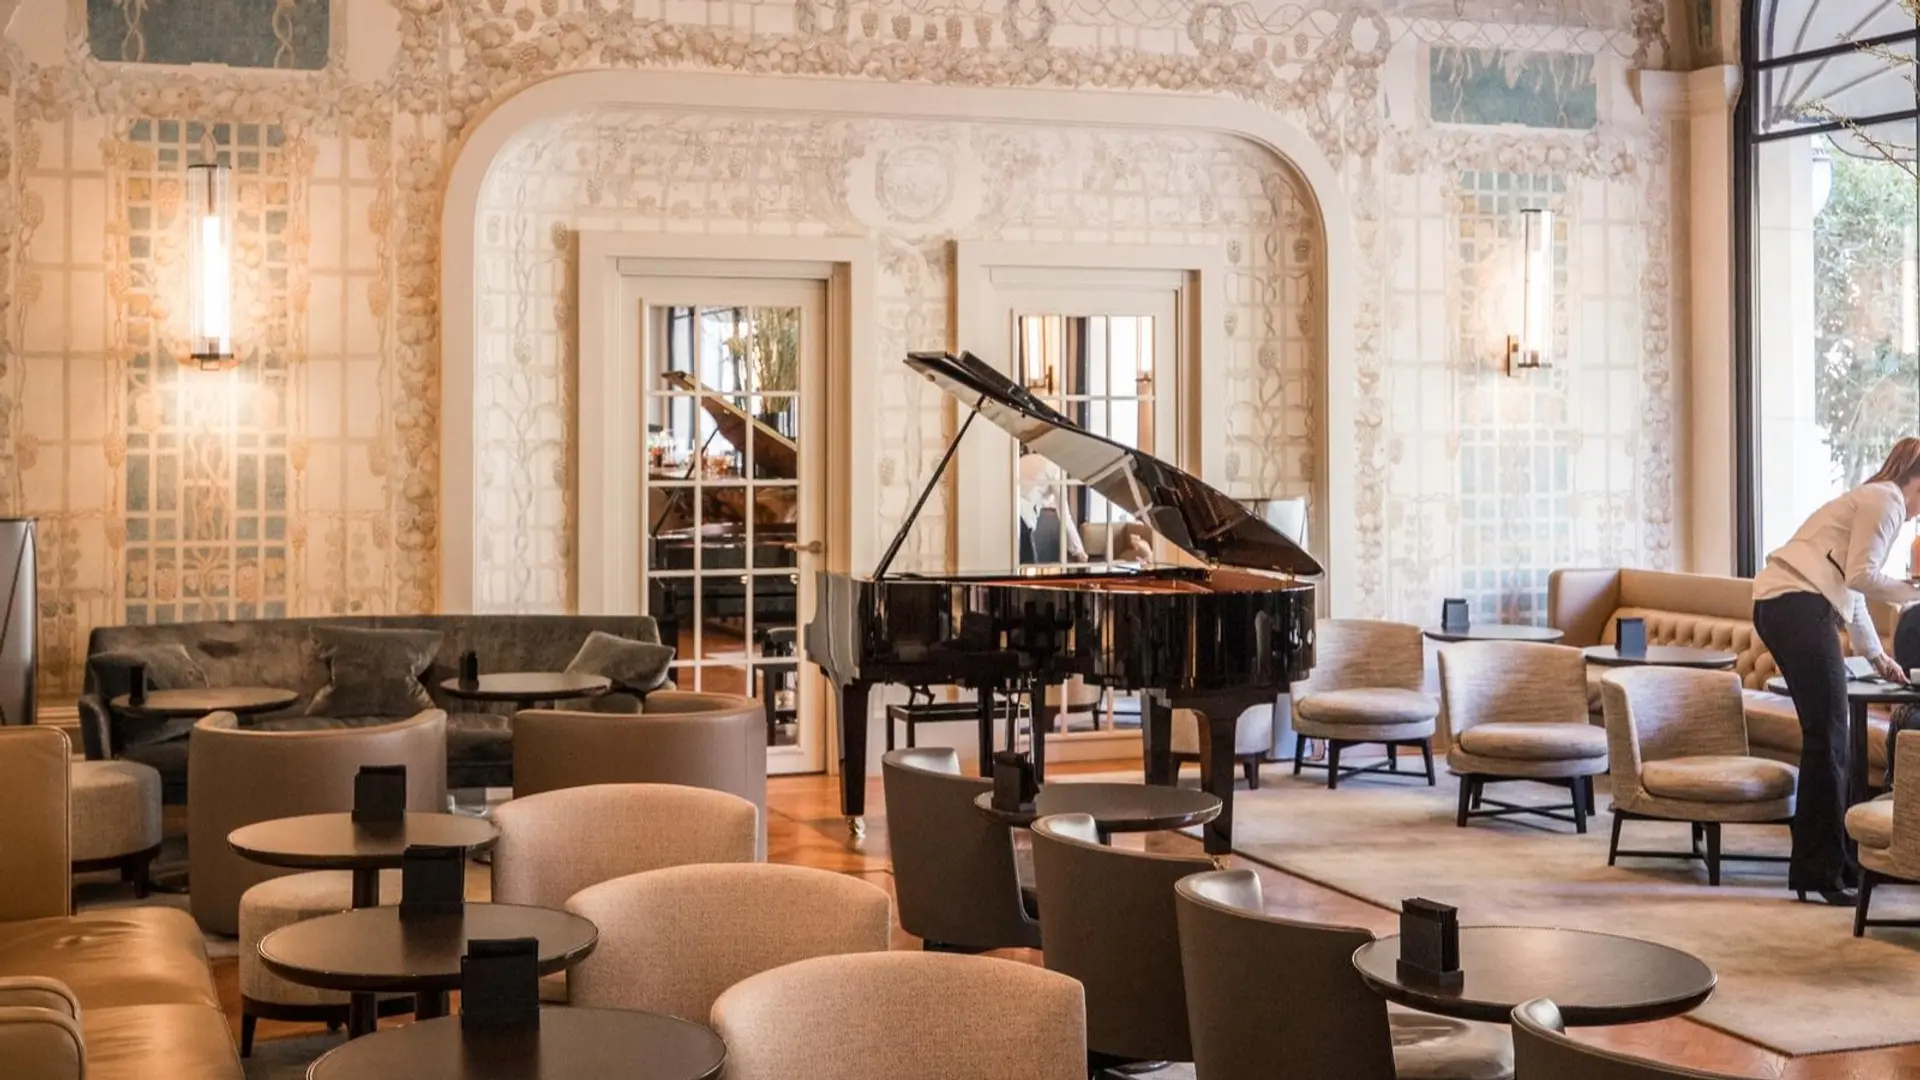 Bar Josephine at Hotel Lutetia with piano, grey decored chairs and white walls.